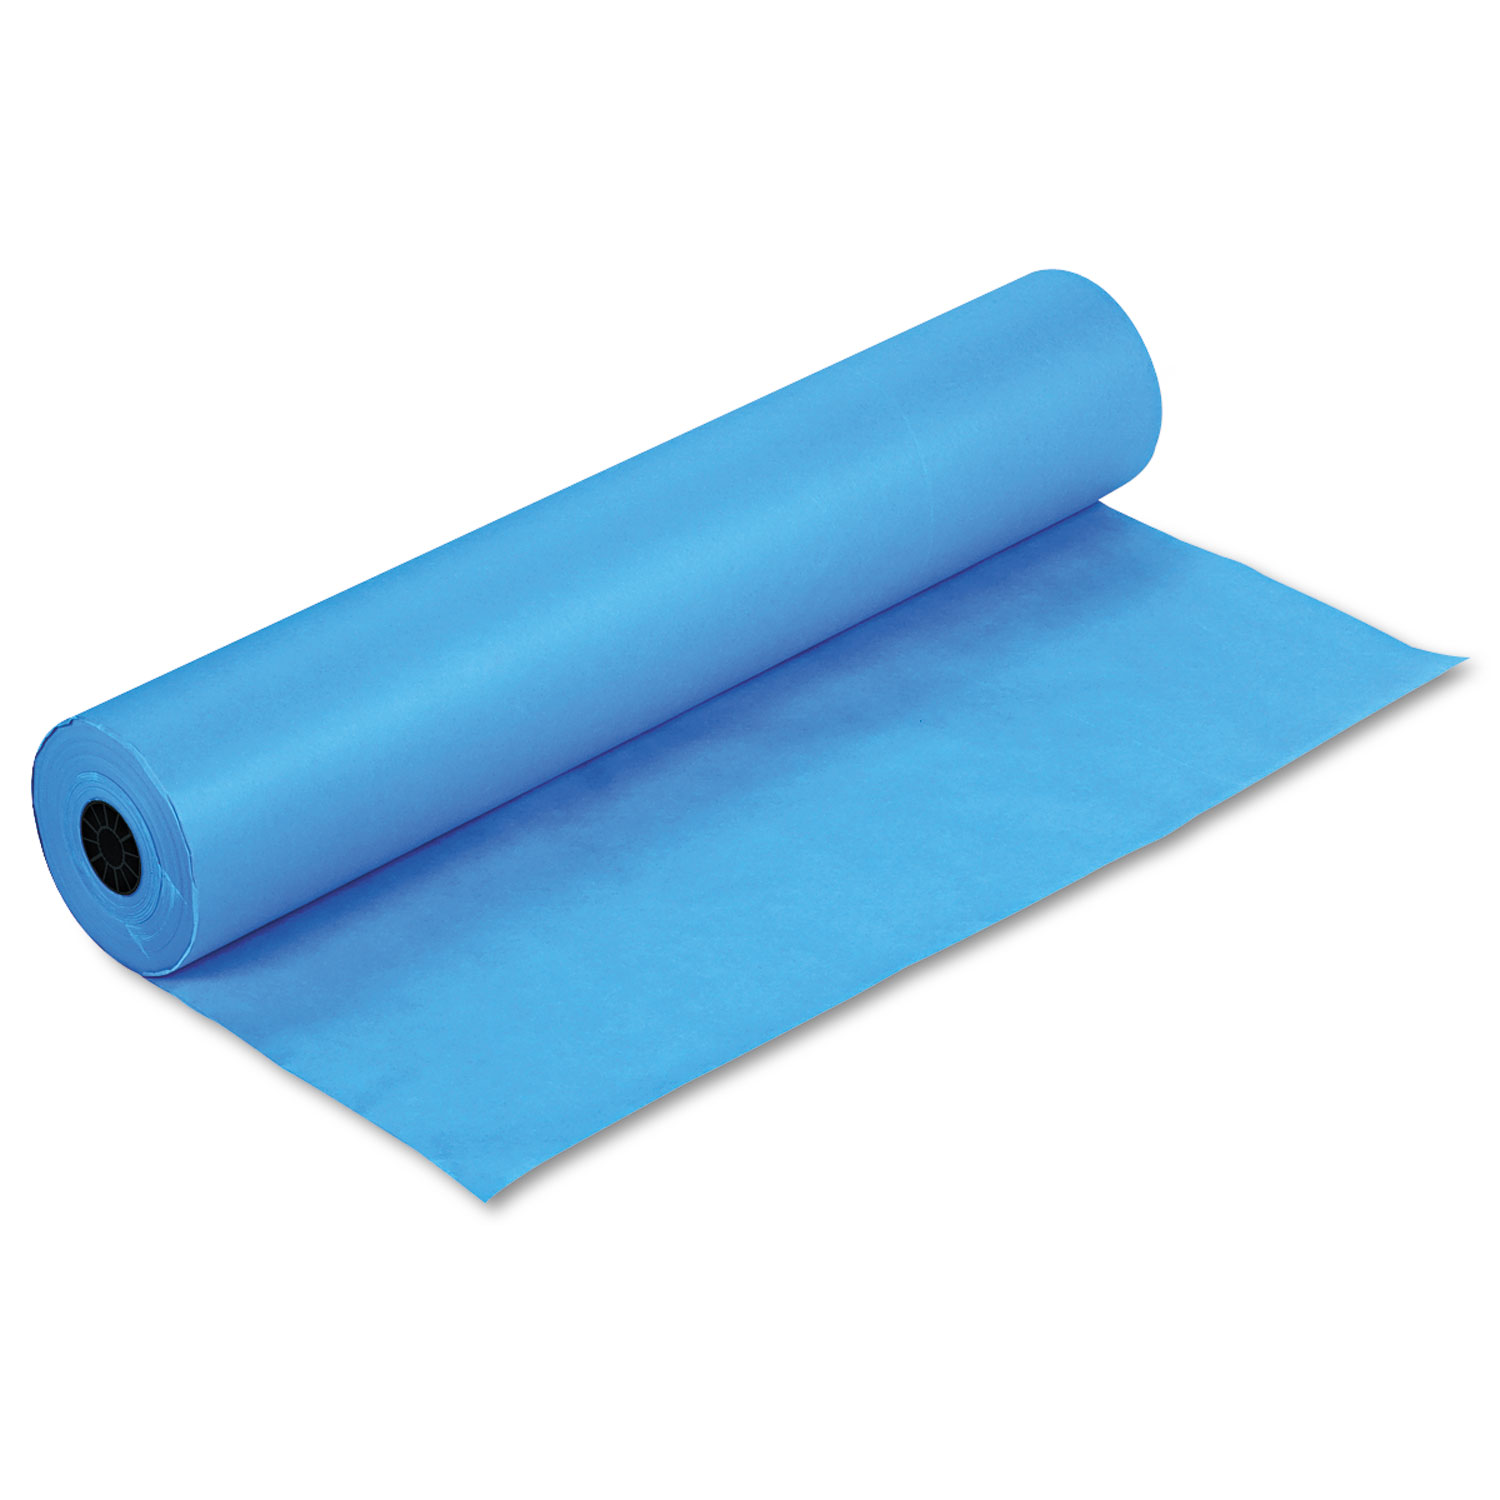  Pacon 63170 Rainbow Duo-Finish Colored Kraft Paper, 35lb, 36 x 1000ft, Brite Blue (PAC63170) 